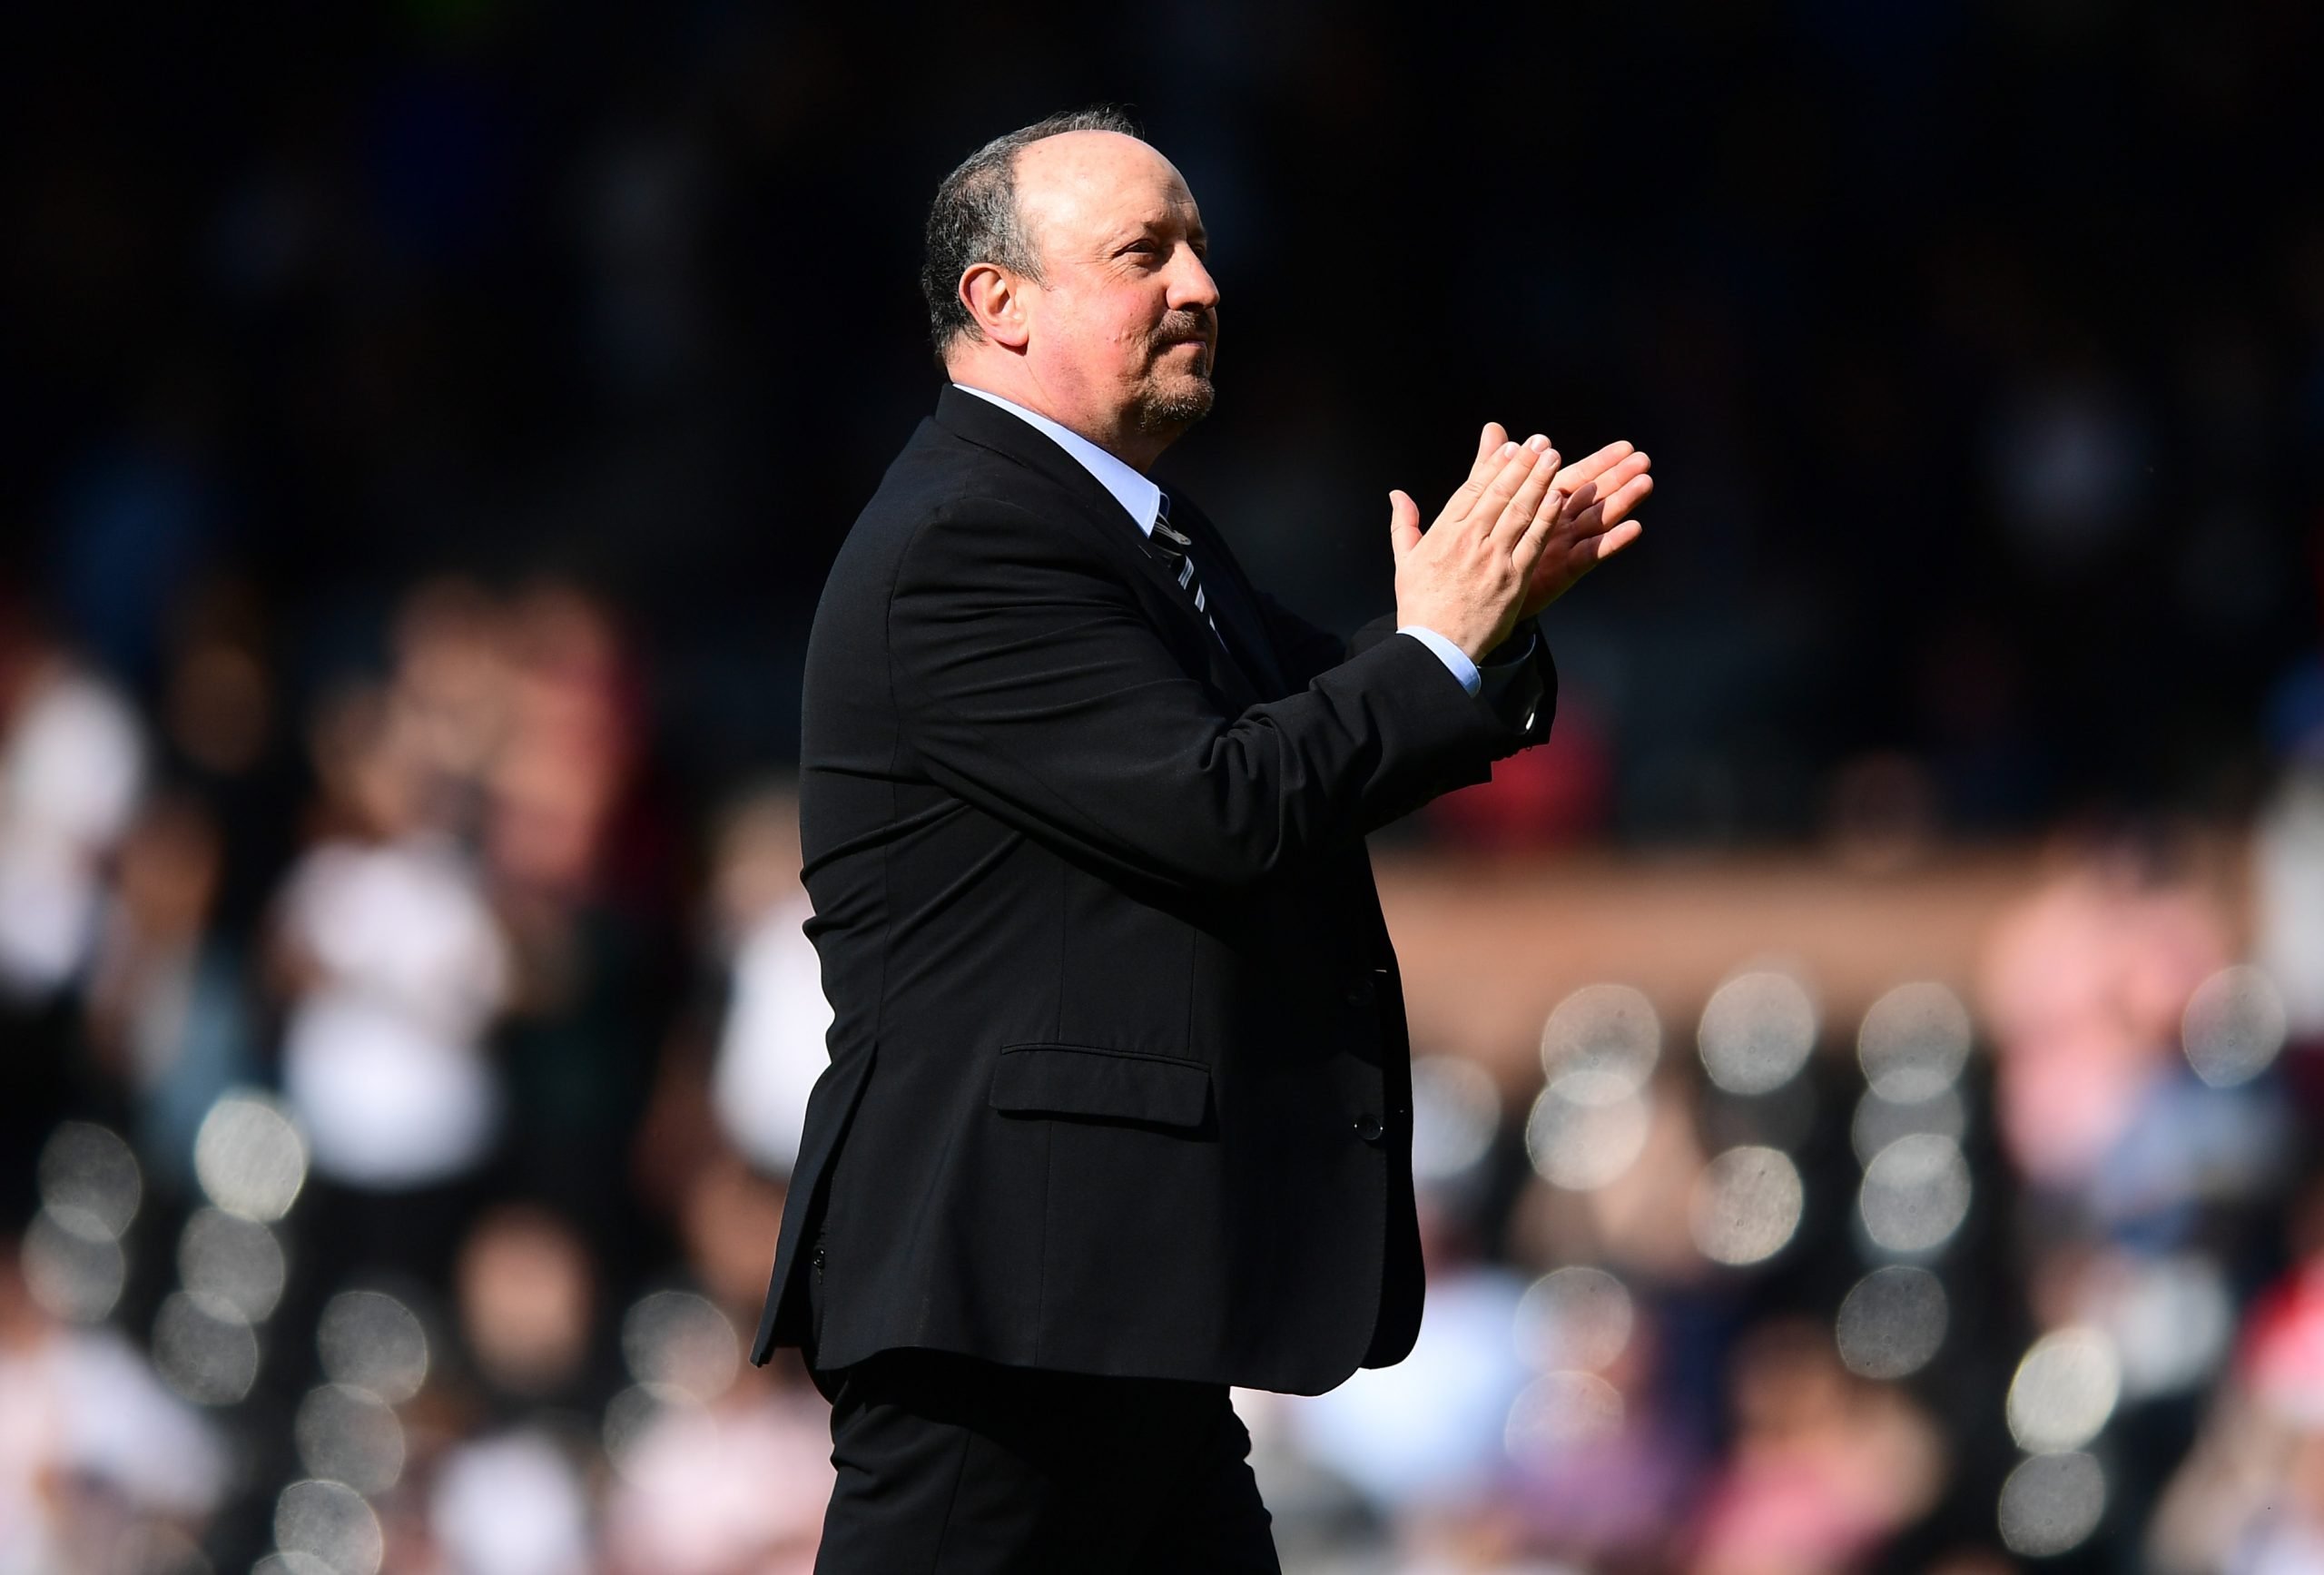 LONDON, ENGLAND - MAY 12: Rafael Benitez, manager of Newcastle United, applauds the fans after the match during the Premier League match between Fulham FC and Newcastle United at Craven Cottage on May 12, 2019 in London, United Kingdom. (Photo by Alex Broadway/Getty Images)